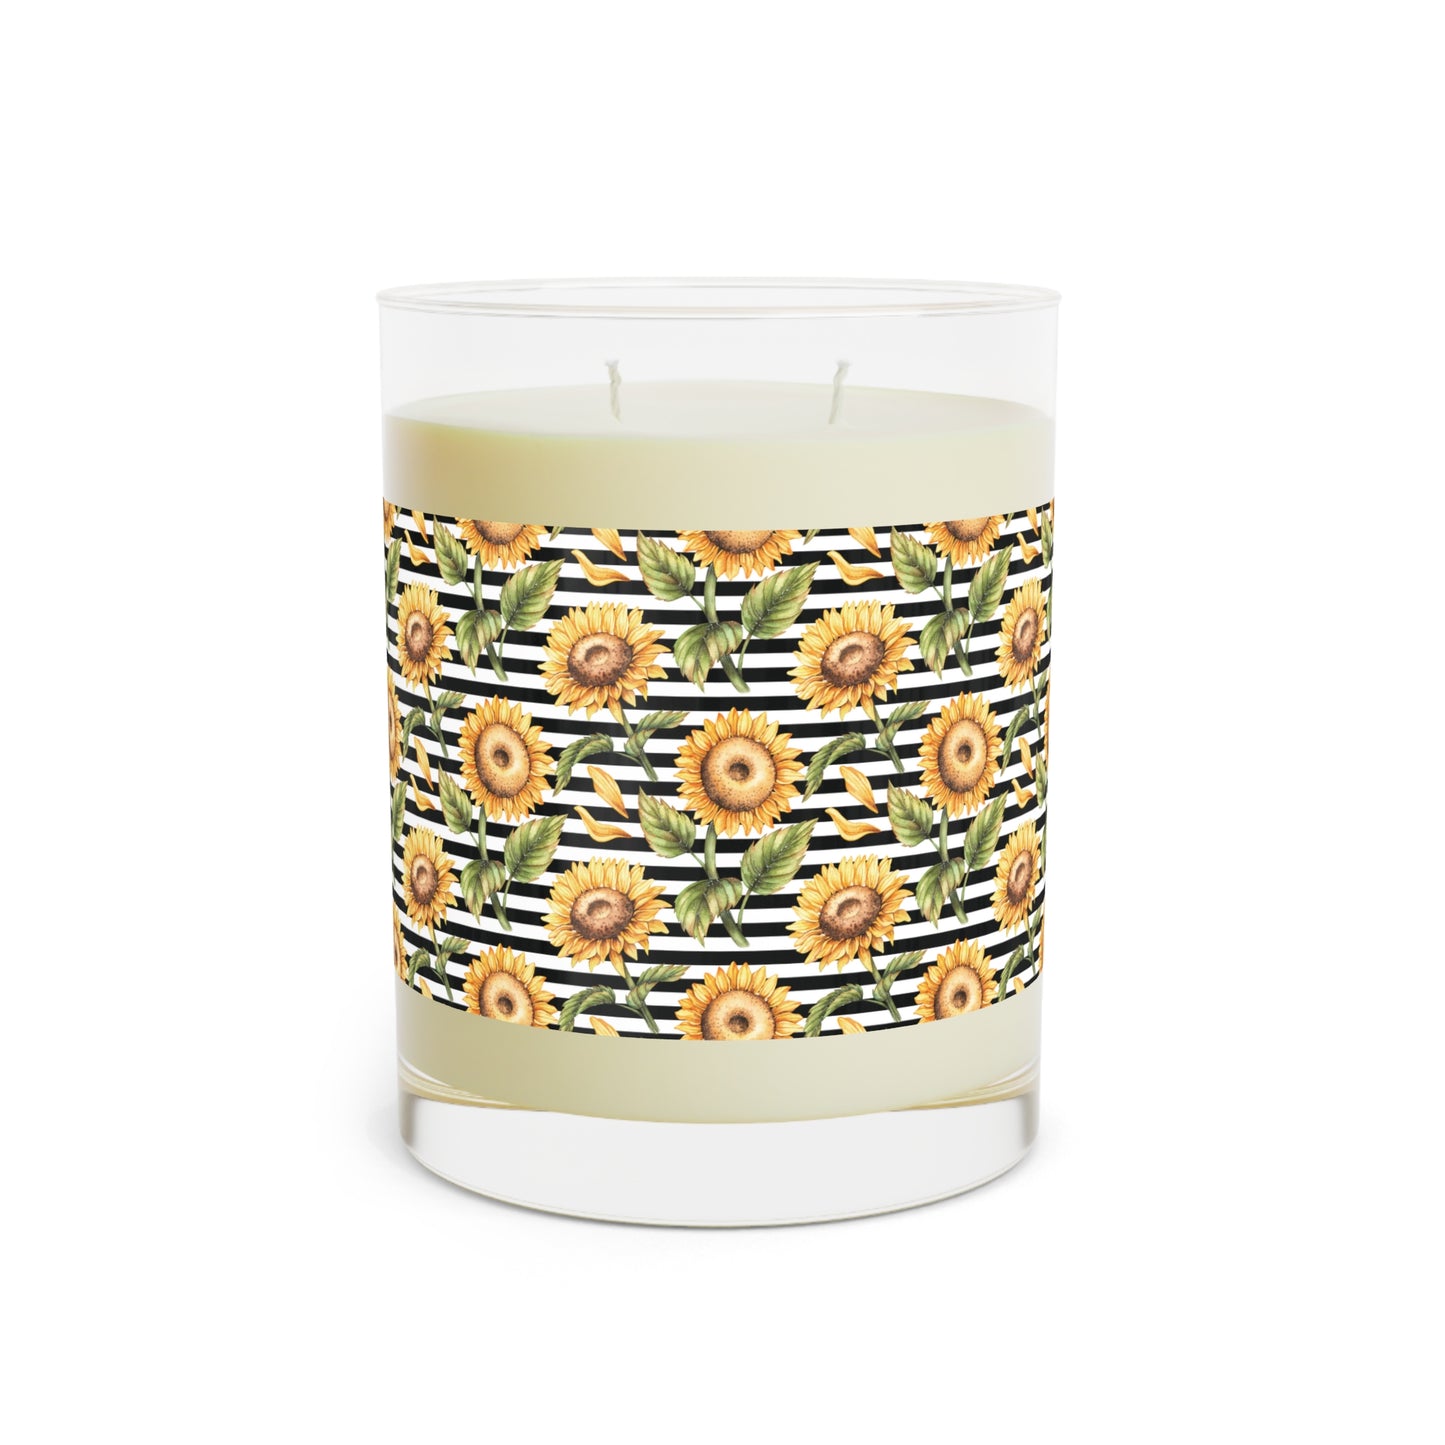 Sunflower Scented Soy Wax Aromatherapy Candle